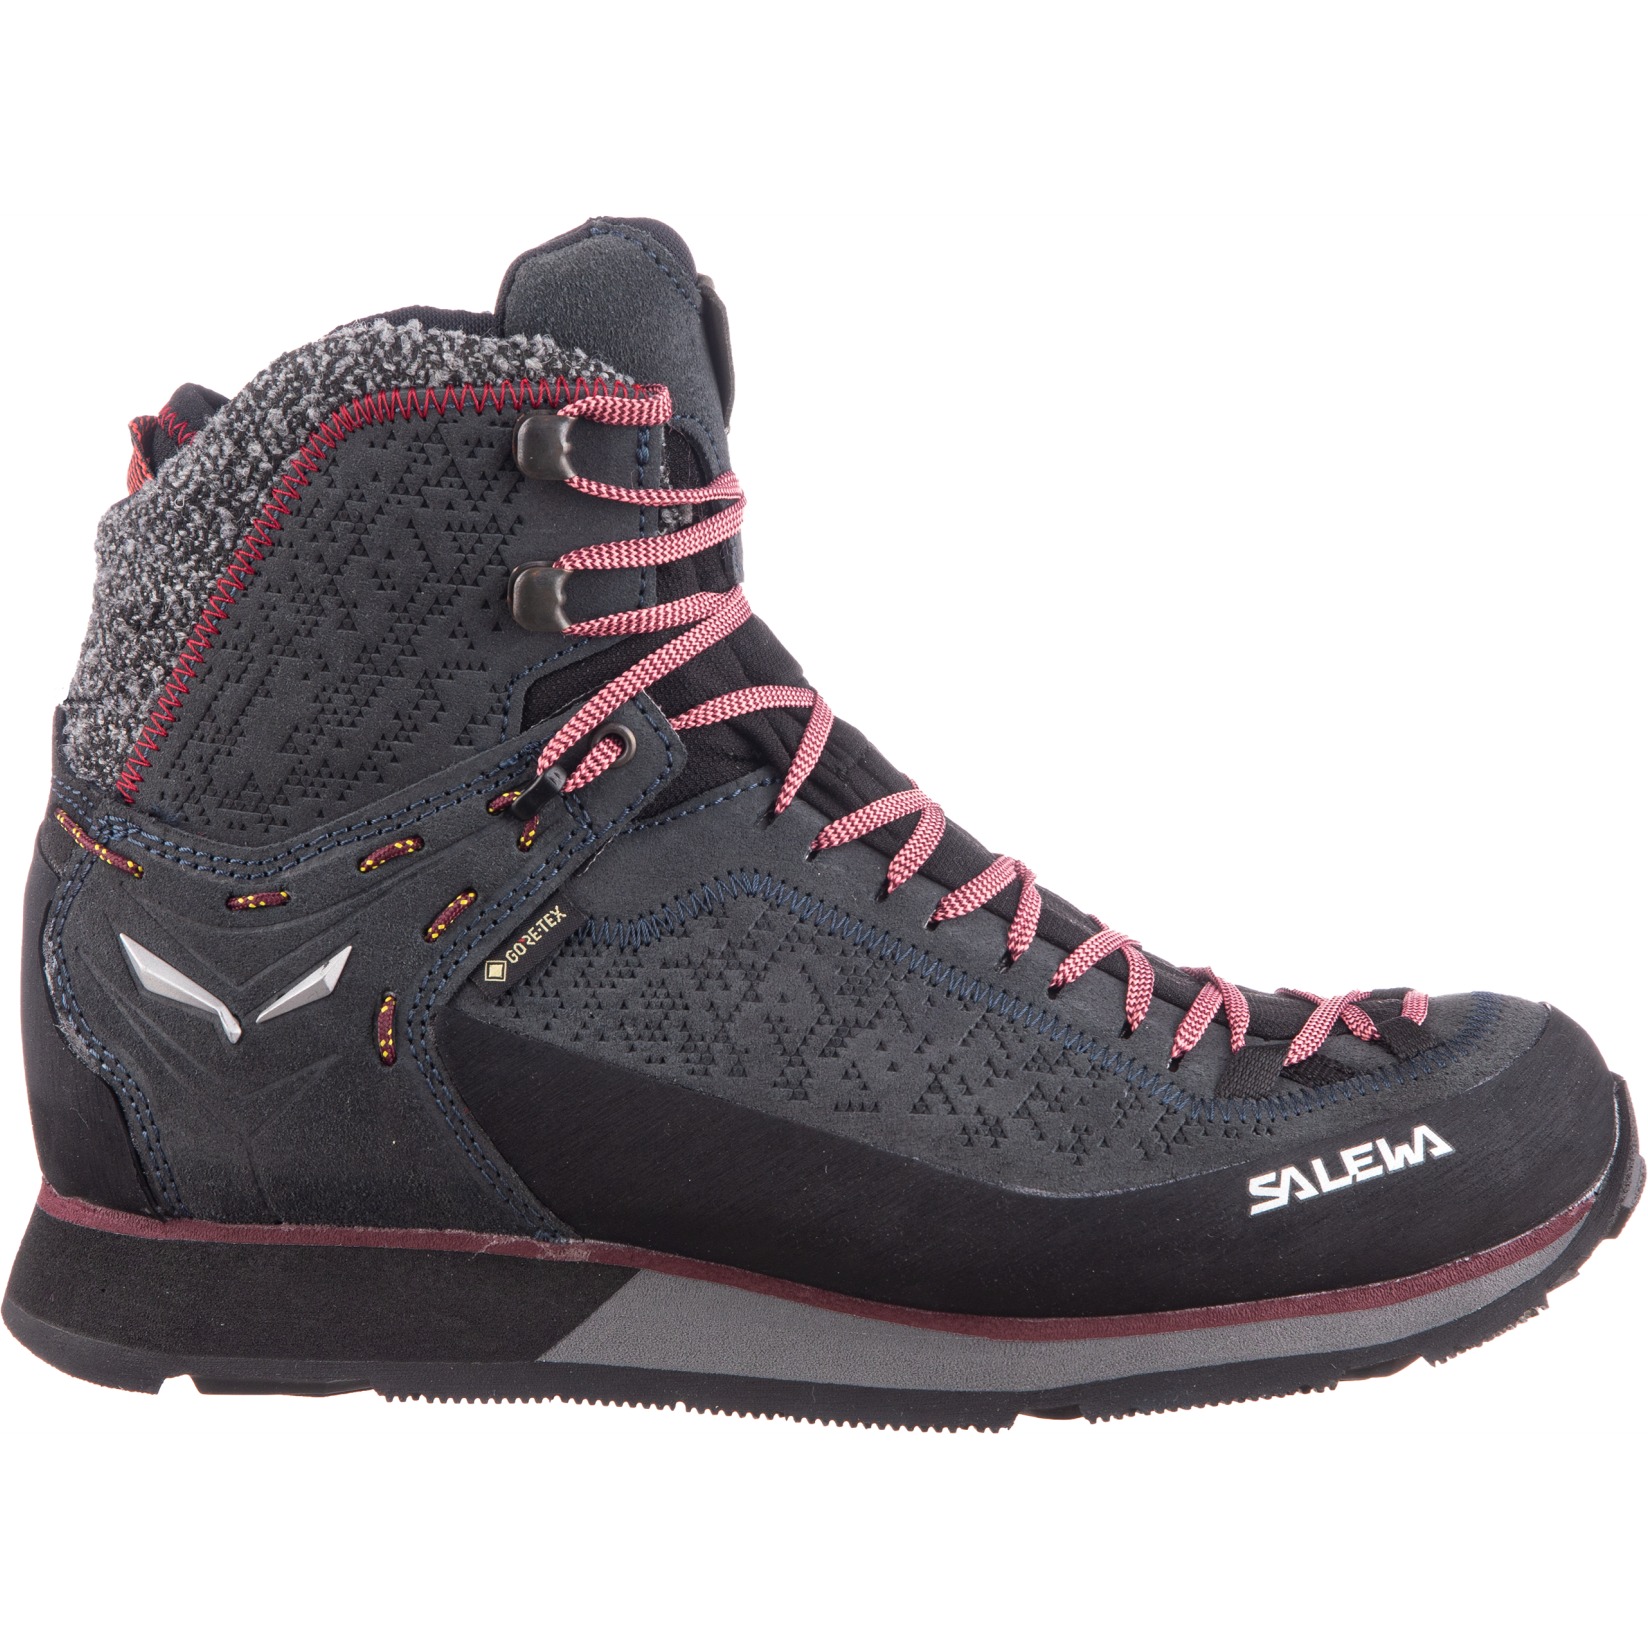 Picture of Salewa Mountain Trainer 2 Winter GTX Hiking Shoes Women - asphalt/tawny port 988